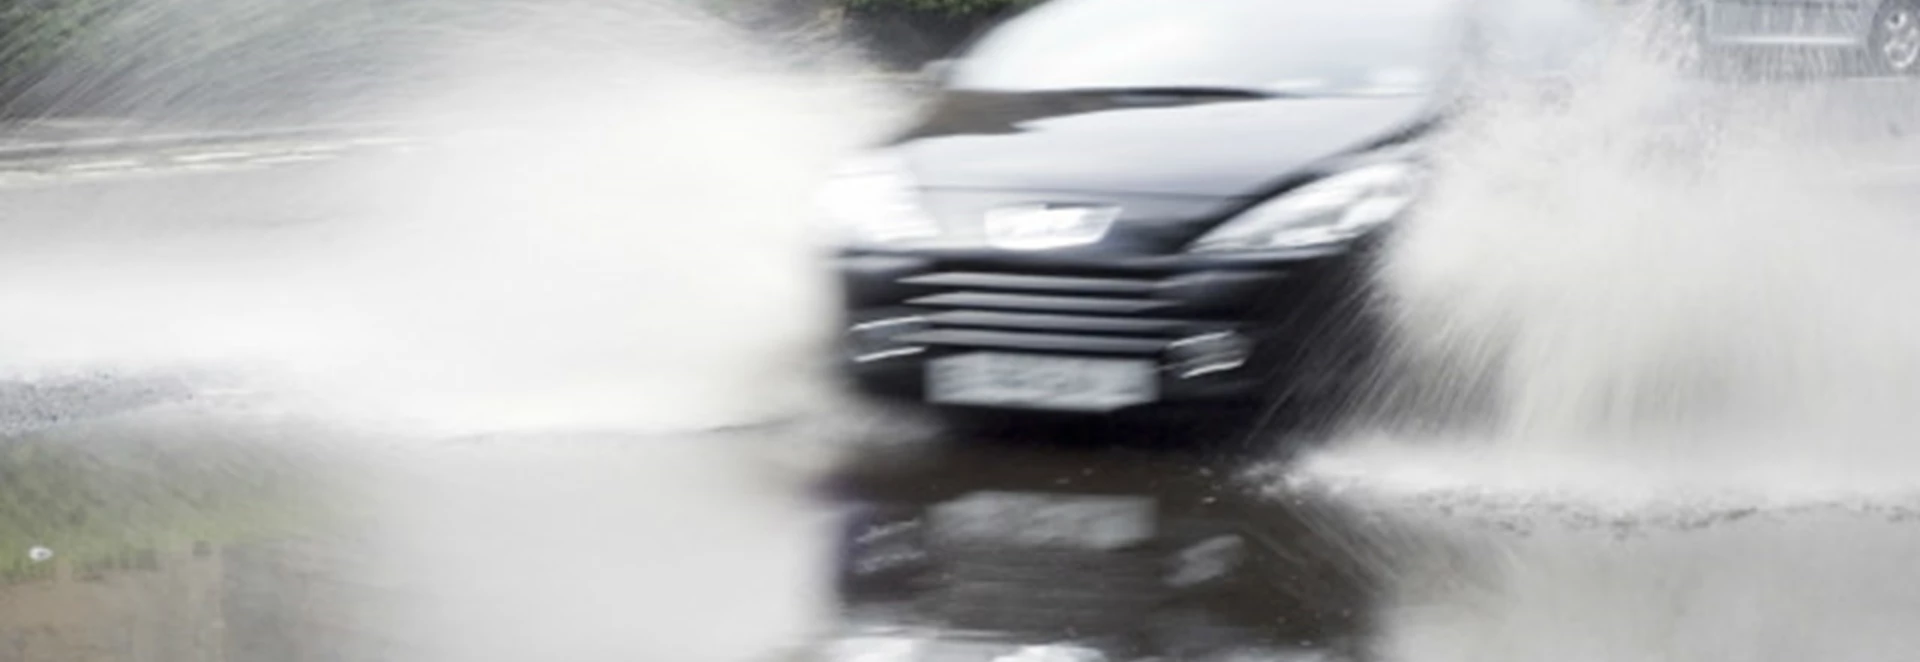 Tips for safe wet weather driving 